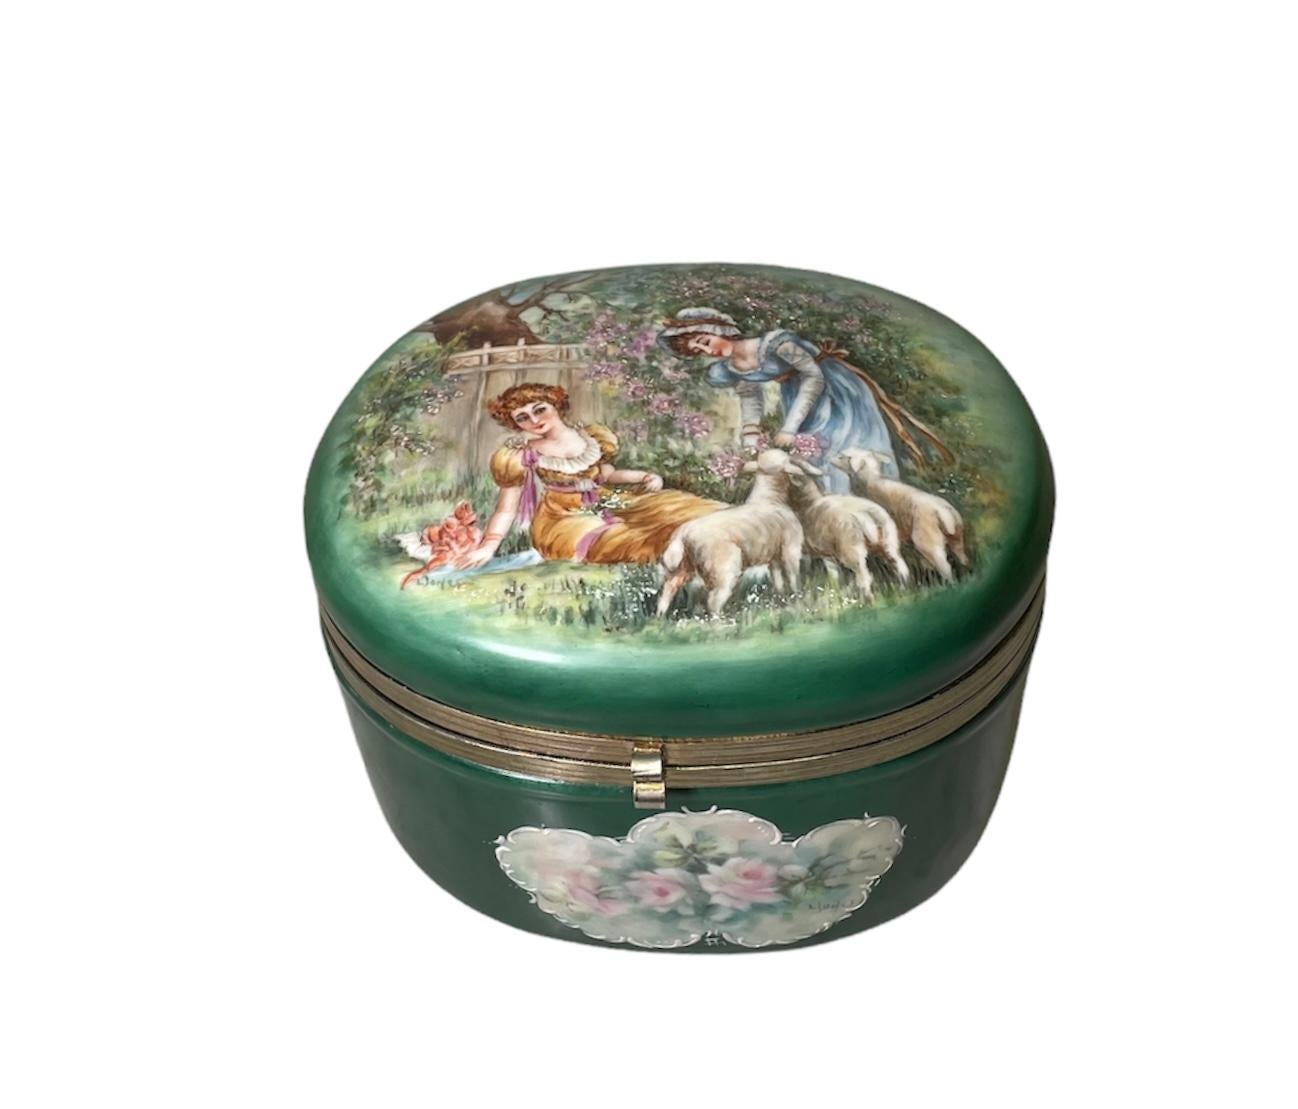 19th Century Large Oval Hand Painted Porcelain Vanity/Jewelry Box For Sale